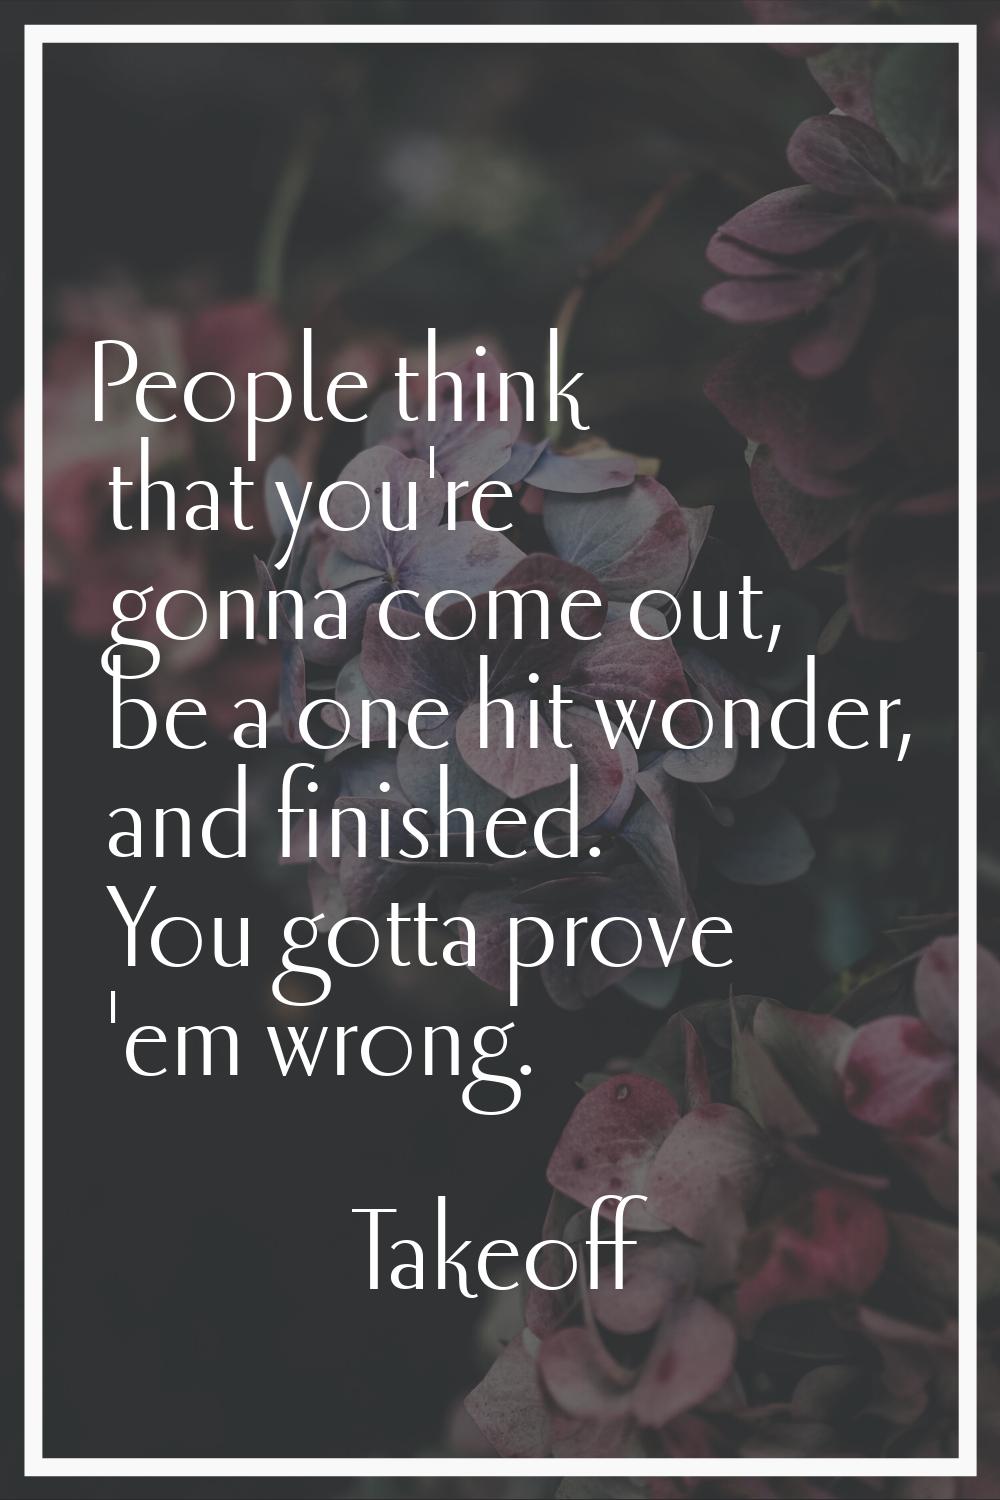 People think that you're gonna come out, be a one hit wonder, and finished. You gotta prove 'em wro